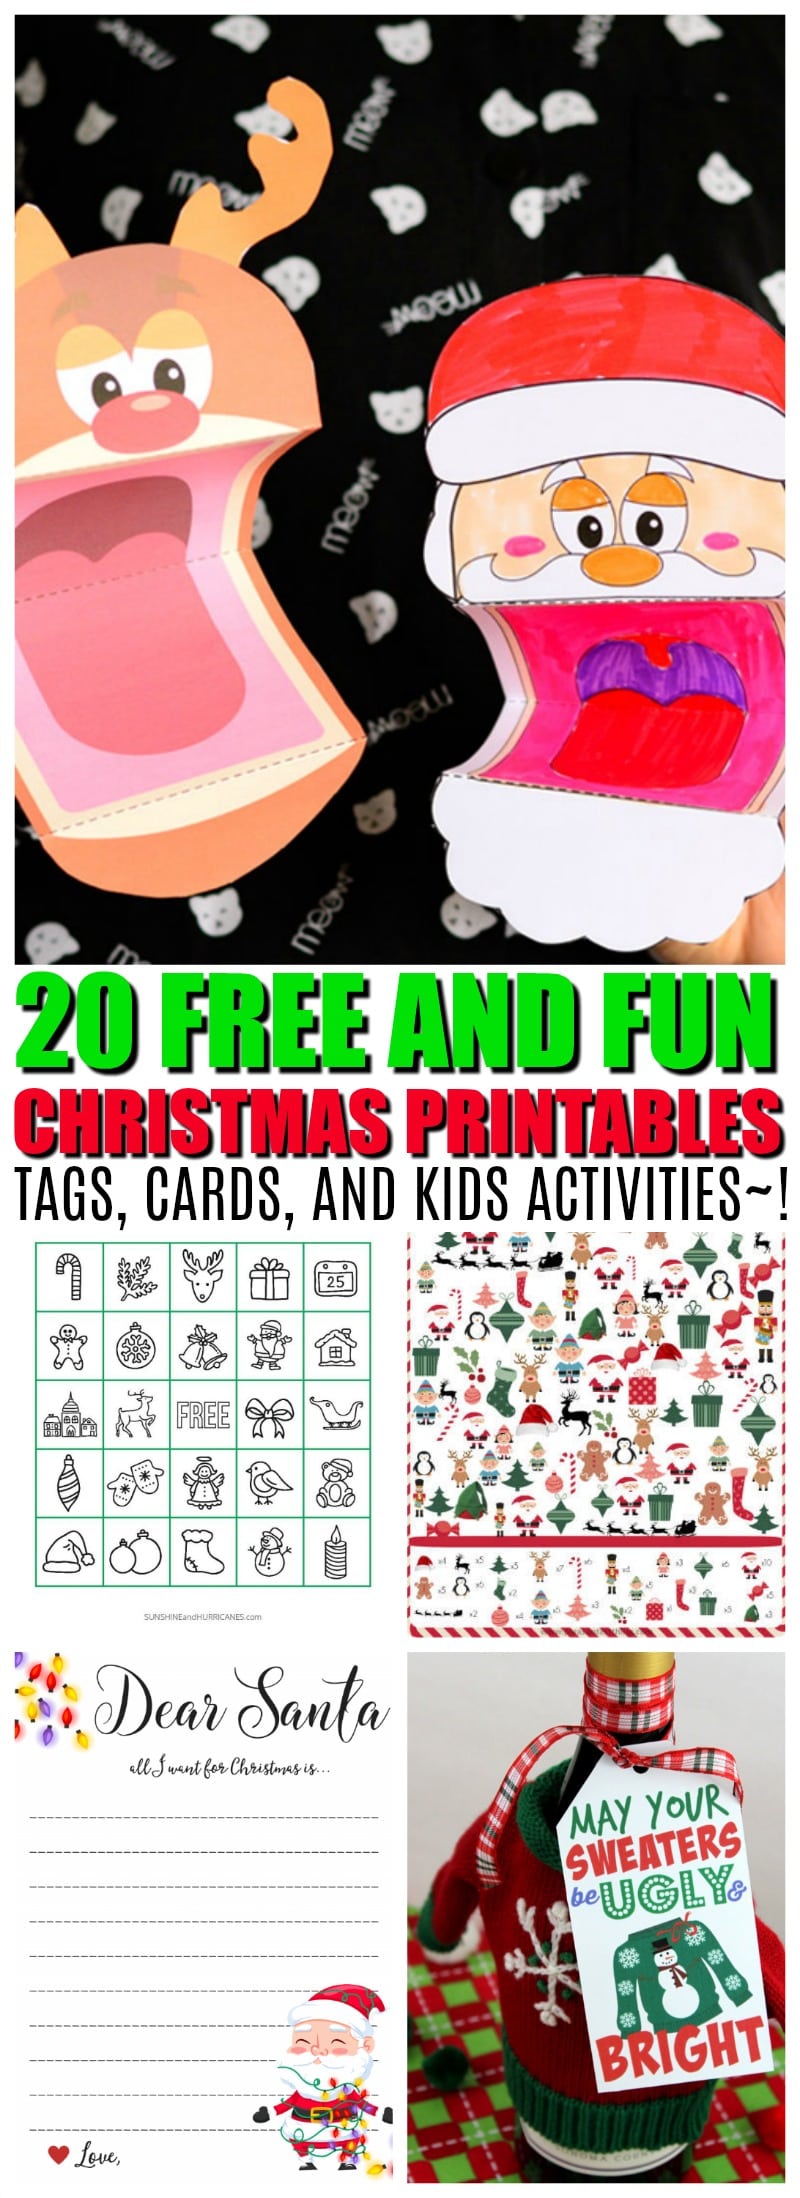 20 Free Christmas Printables that will make your season merry and bright, #printables for holiday season from tags, to cards, to kids activities! 